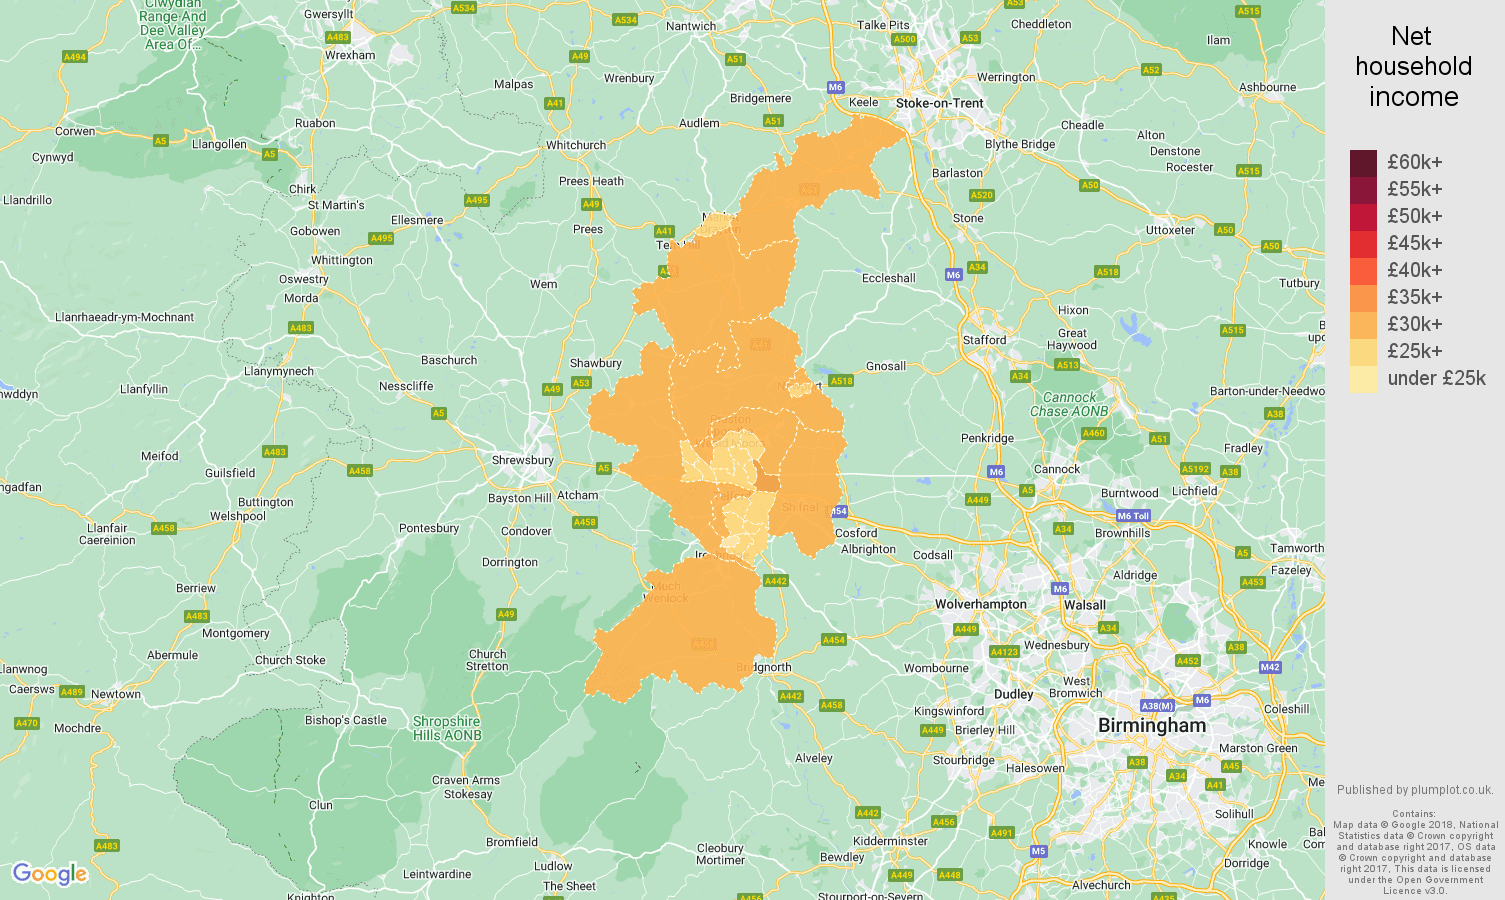 Telford net household income map